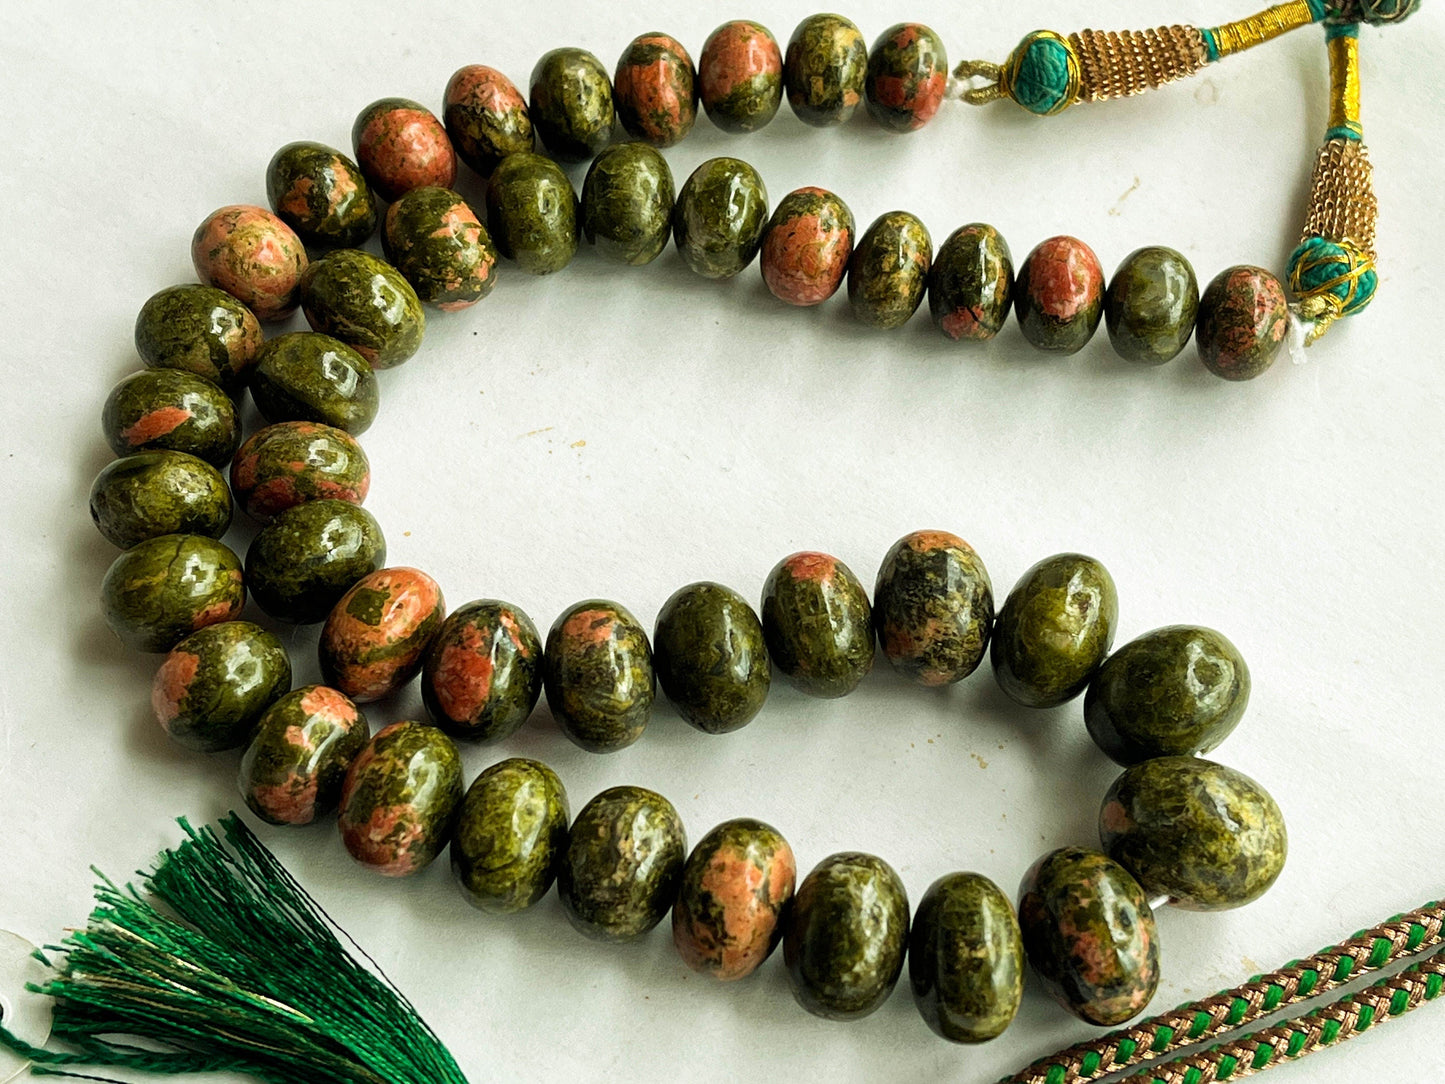 Unakite Rondelle Beads, Unakite Beads, Unakite Smooth Rondelle Beads, Natural Unakite Gemstone beads for jewelry, 16 Inches Beadsforyourjewelry